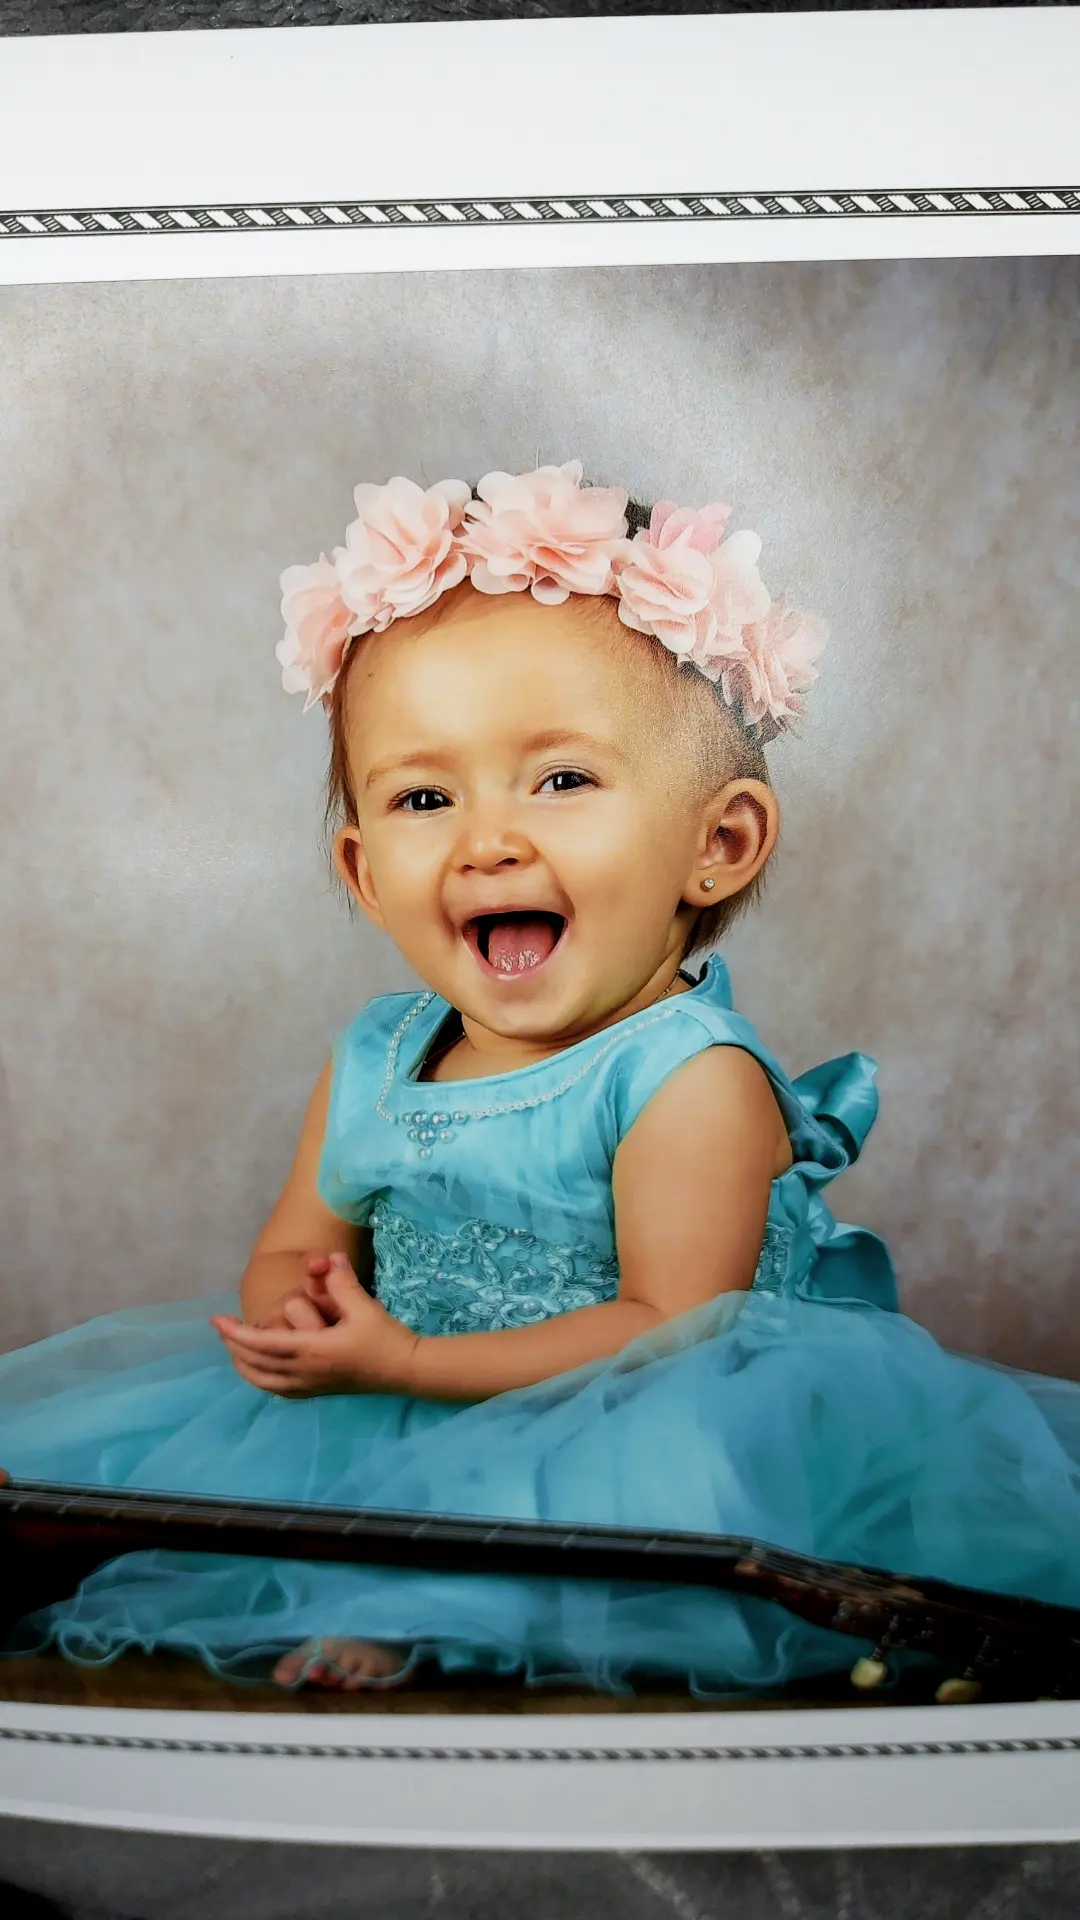 Sourire, Joue, Yeux, Picture Frame, Baby & Toddler Clothing, Flash Photography, Sleeve, Happy, Iris, Rose, Bambin, Aqua, Headpiece, Baby, Headband, Magenta, Fun, Enfant, Jewellery, Hair Accessory, Personne